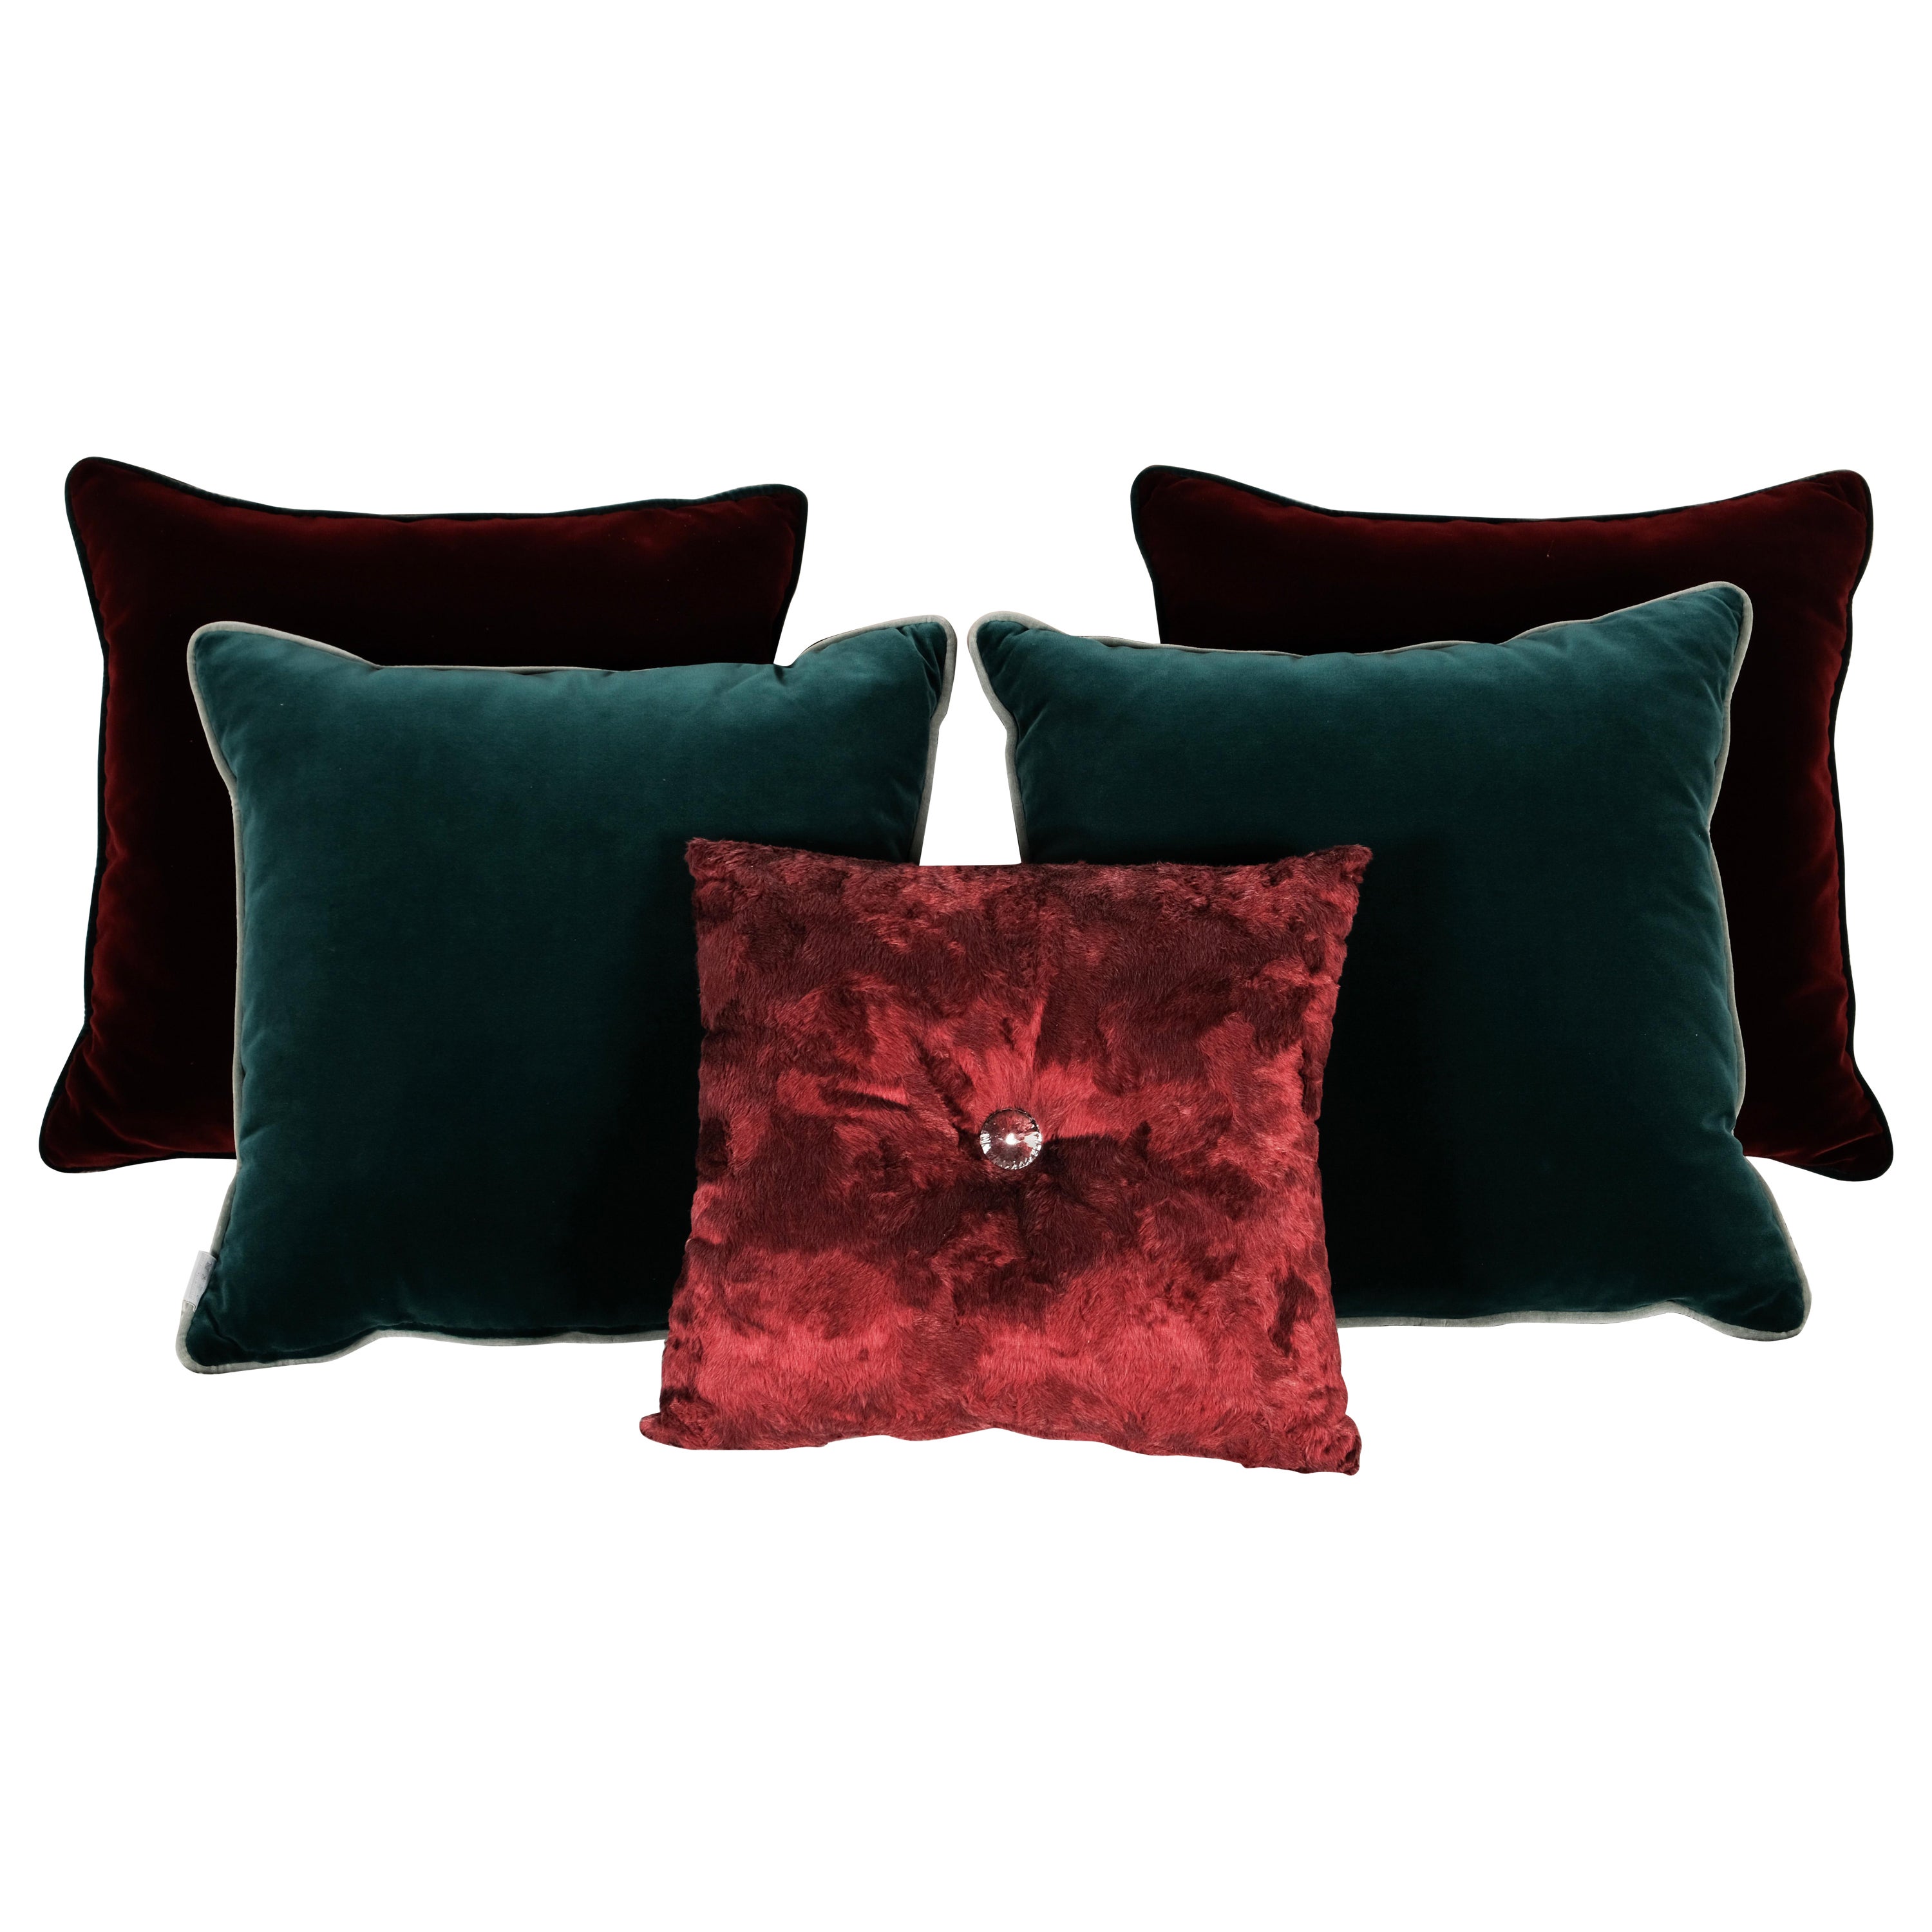 Set of 5 Decorative Pillows Red Green Velvet Faux Fur by Lusitanus For Sale